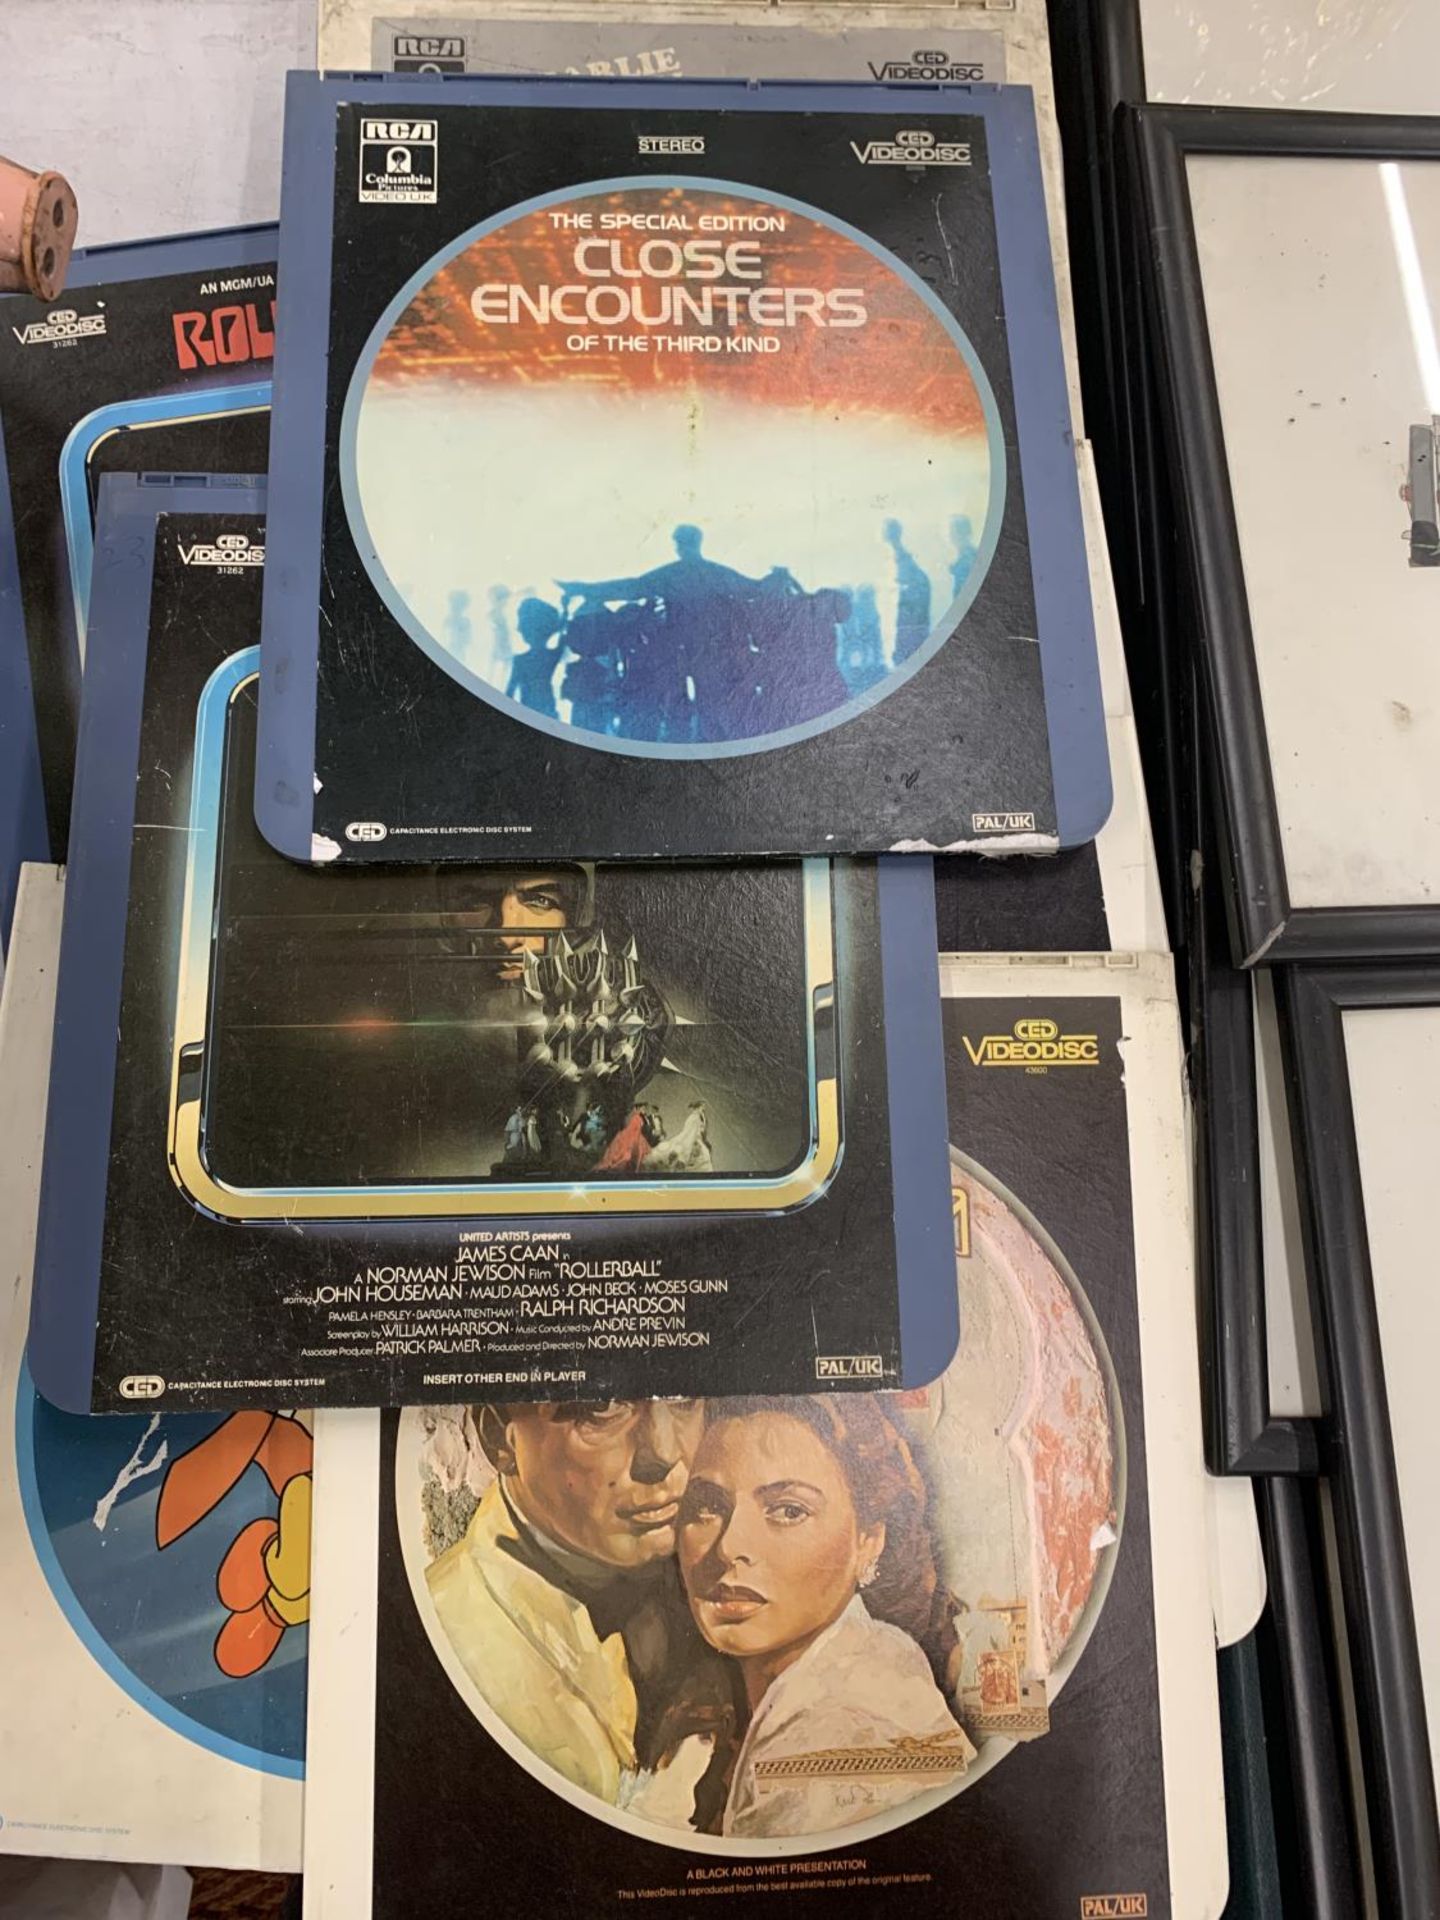 A COLLECTION OF VINTAGE VIDEO DISCS TO INCLUDE CASABLANCA, OLIVER, ROLLERBALL, MIGHTY MOUSE, ETC - 8 - Image 2 of 2